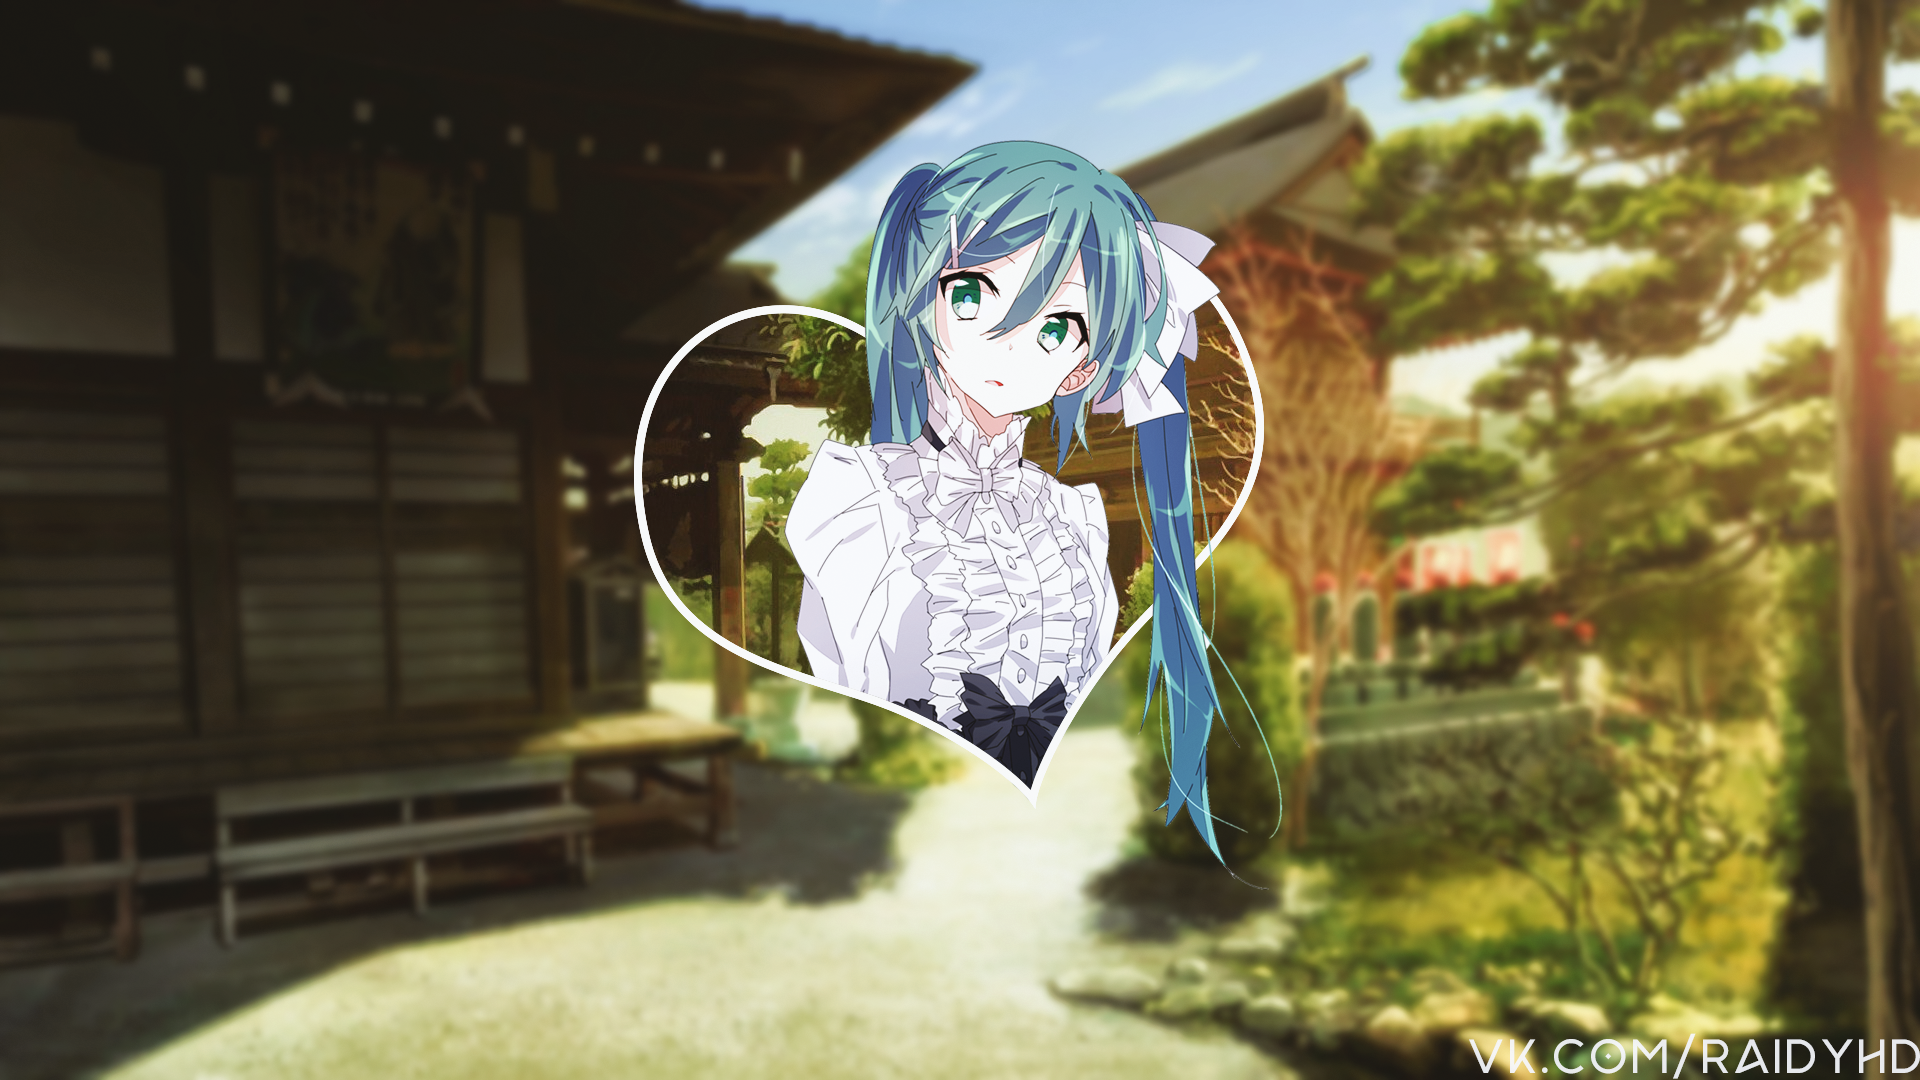 Anime 1920x1080 anime anime girls picture-in-picture Hatsune Miku Vocaloid